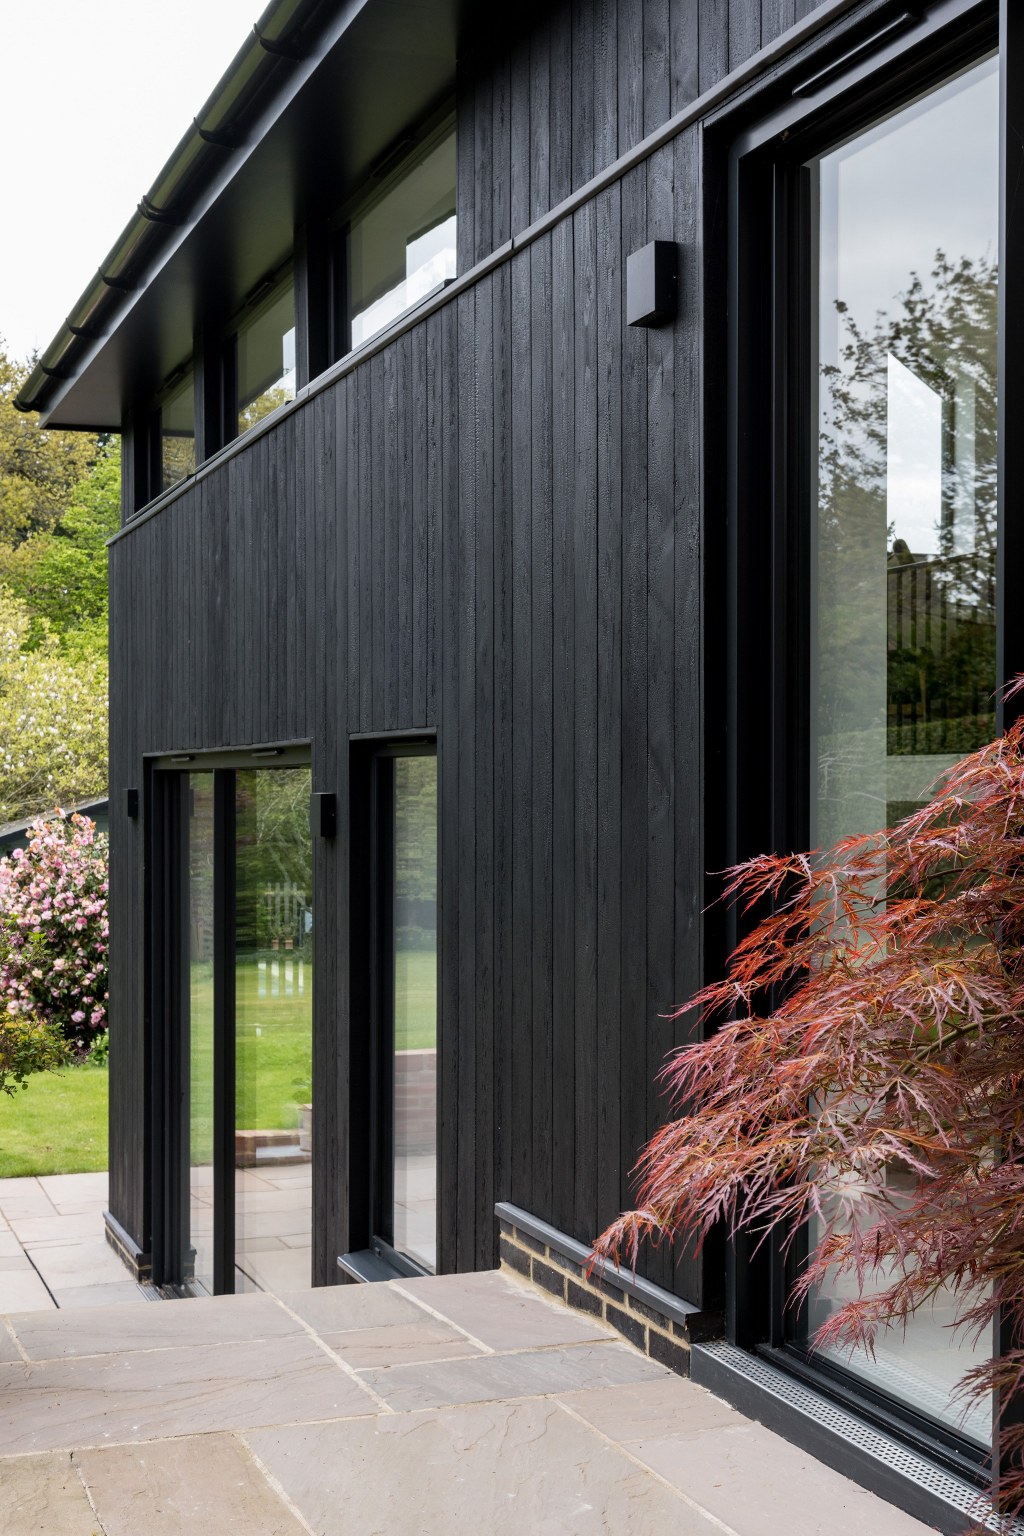 Pippins / Pippins - Steps down alongside Charred Timber Extension